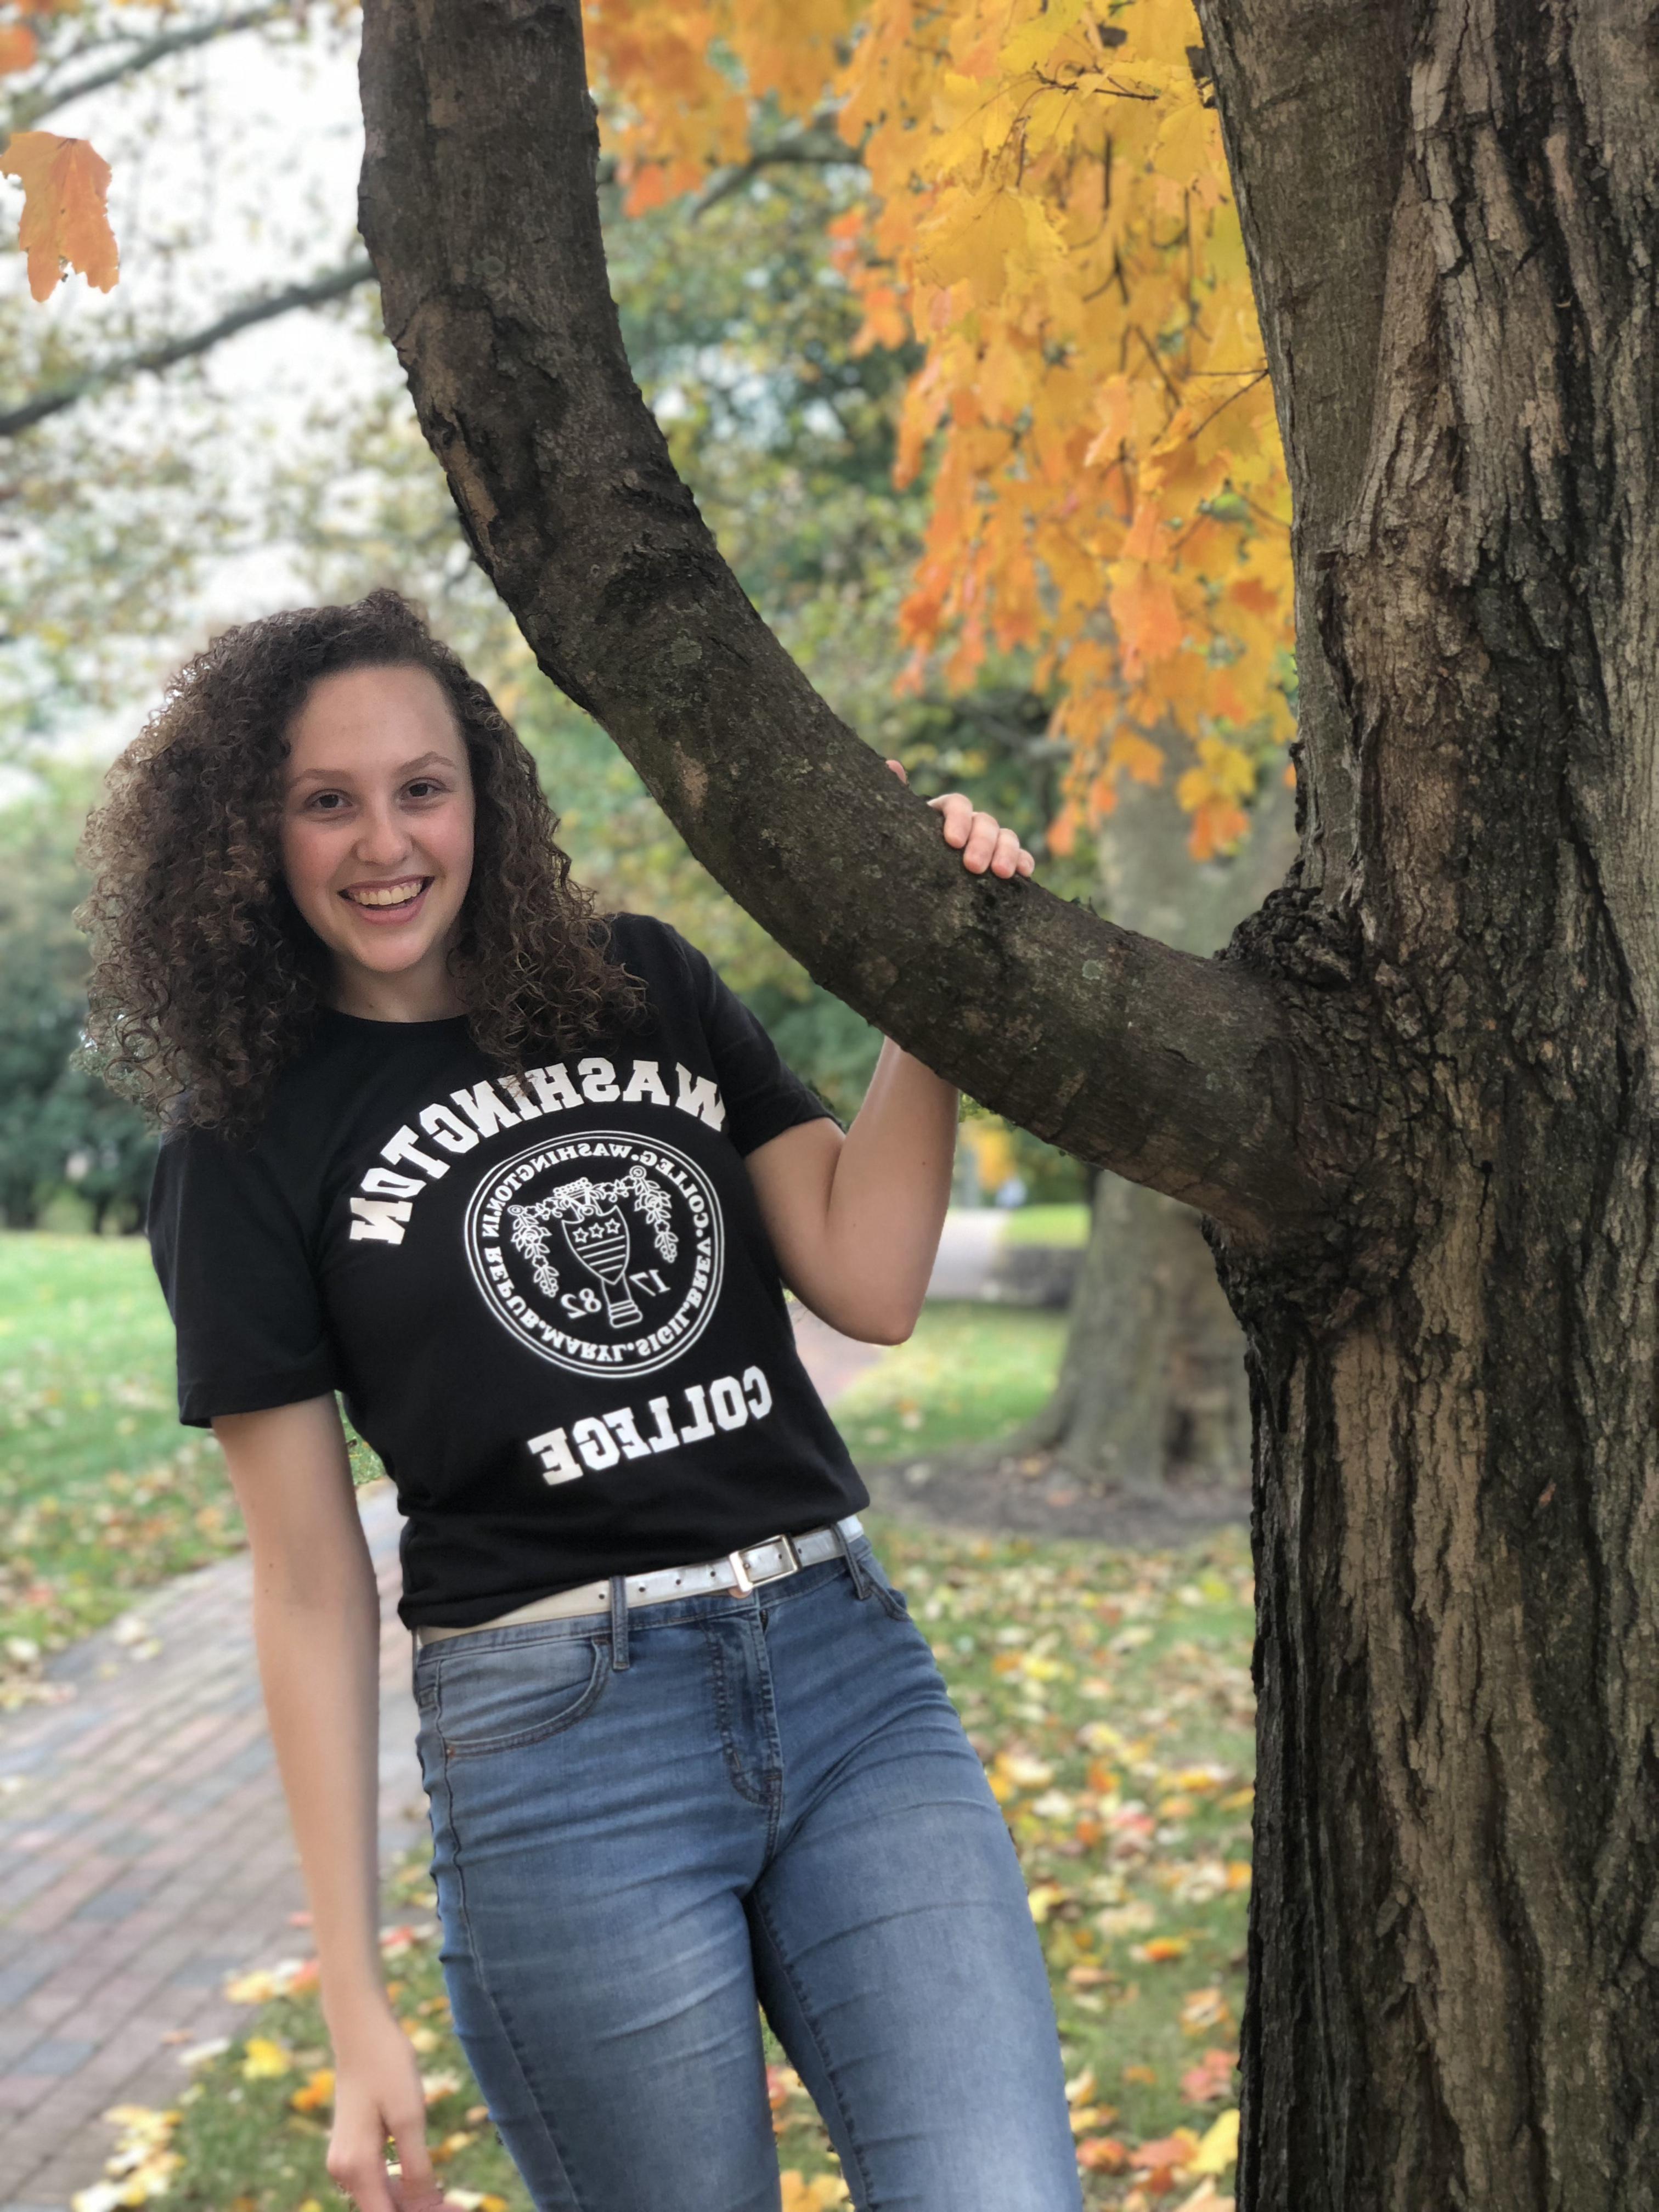 Carlee, smiling 和 wearing a black t-shirt with the 九州娱乐官网 logo, 蓝色牛仔裤, 和 a white belt in front of fall foliage. 